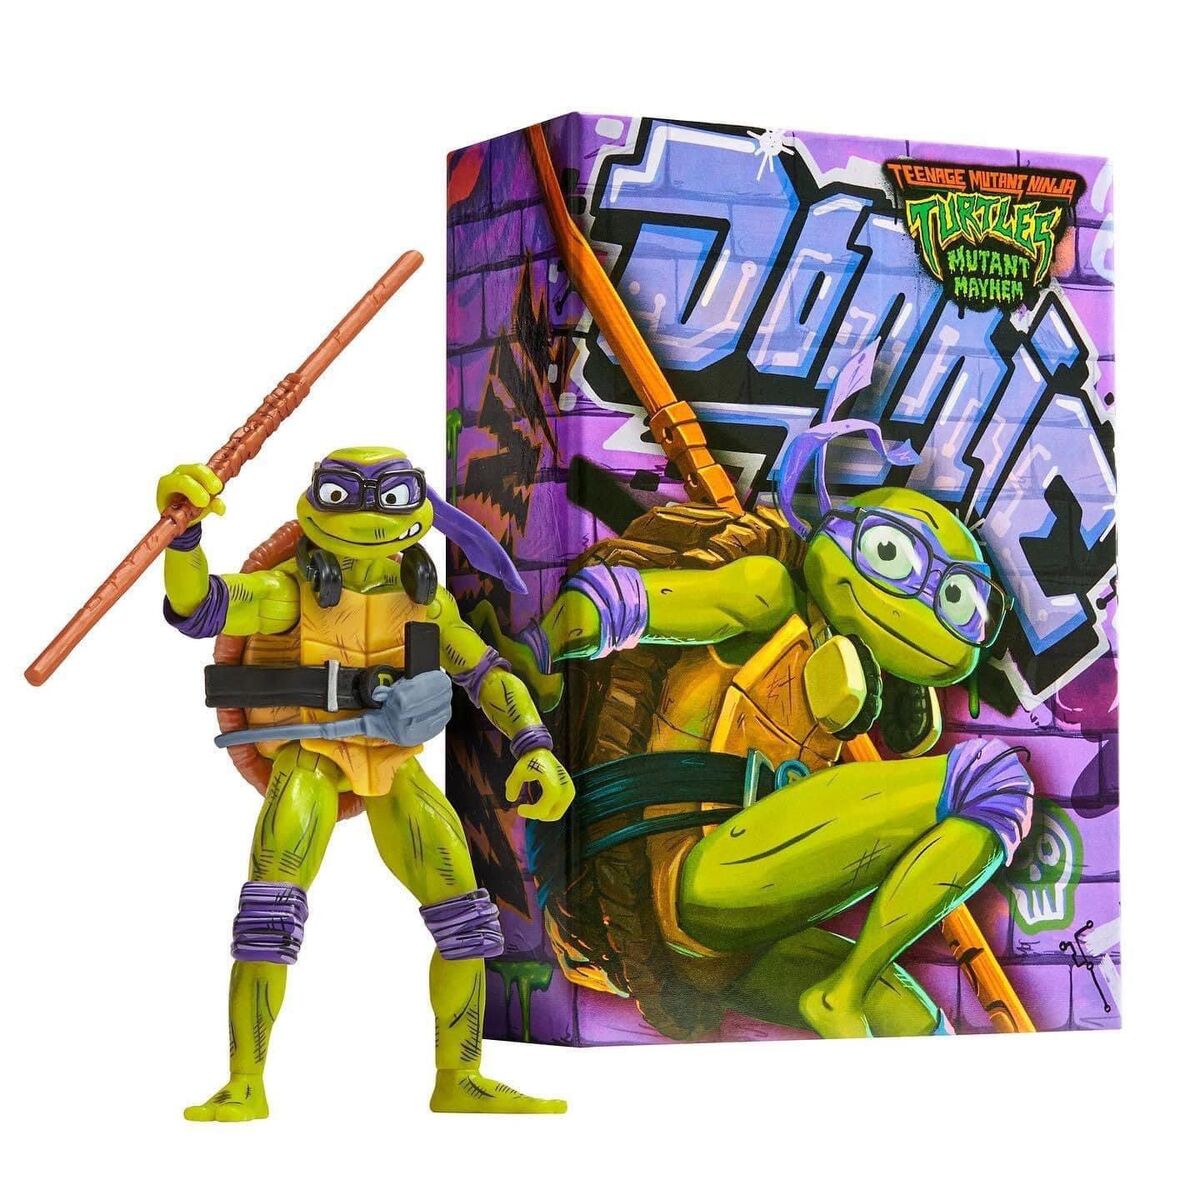 https://static.wikia.nocookie.net/tmnt/images/d/df/Mmsdccdon1.jpg/revision/latest/scale-to-width-down/1200?cb=20230731170625